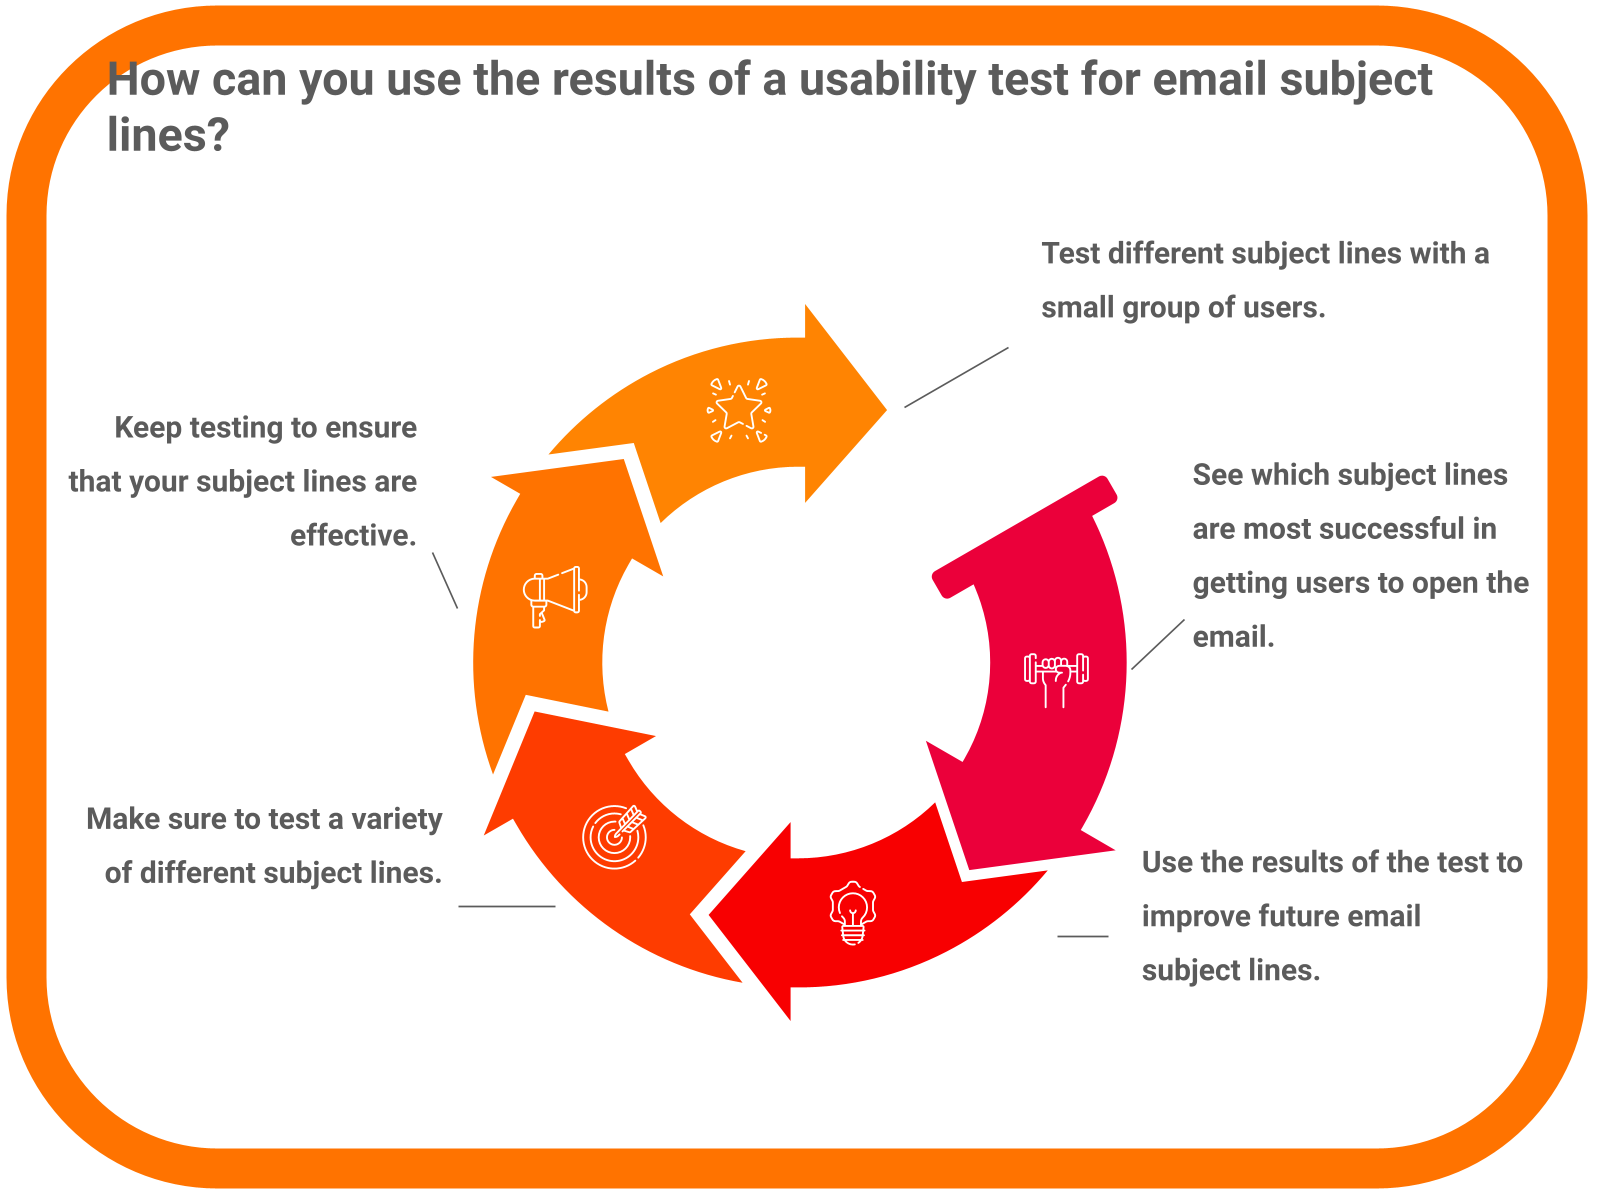 How can you use the results of a usability test for email subject lines?